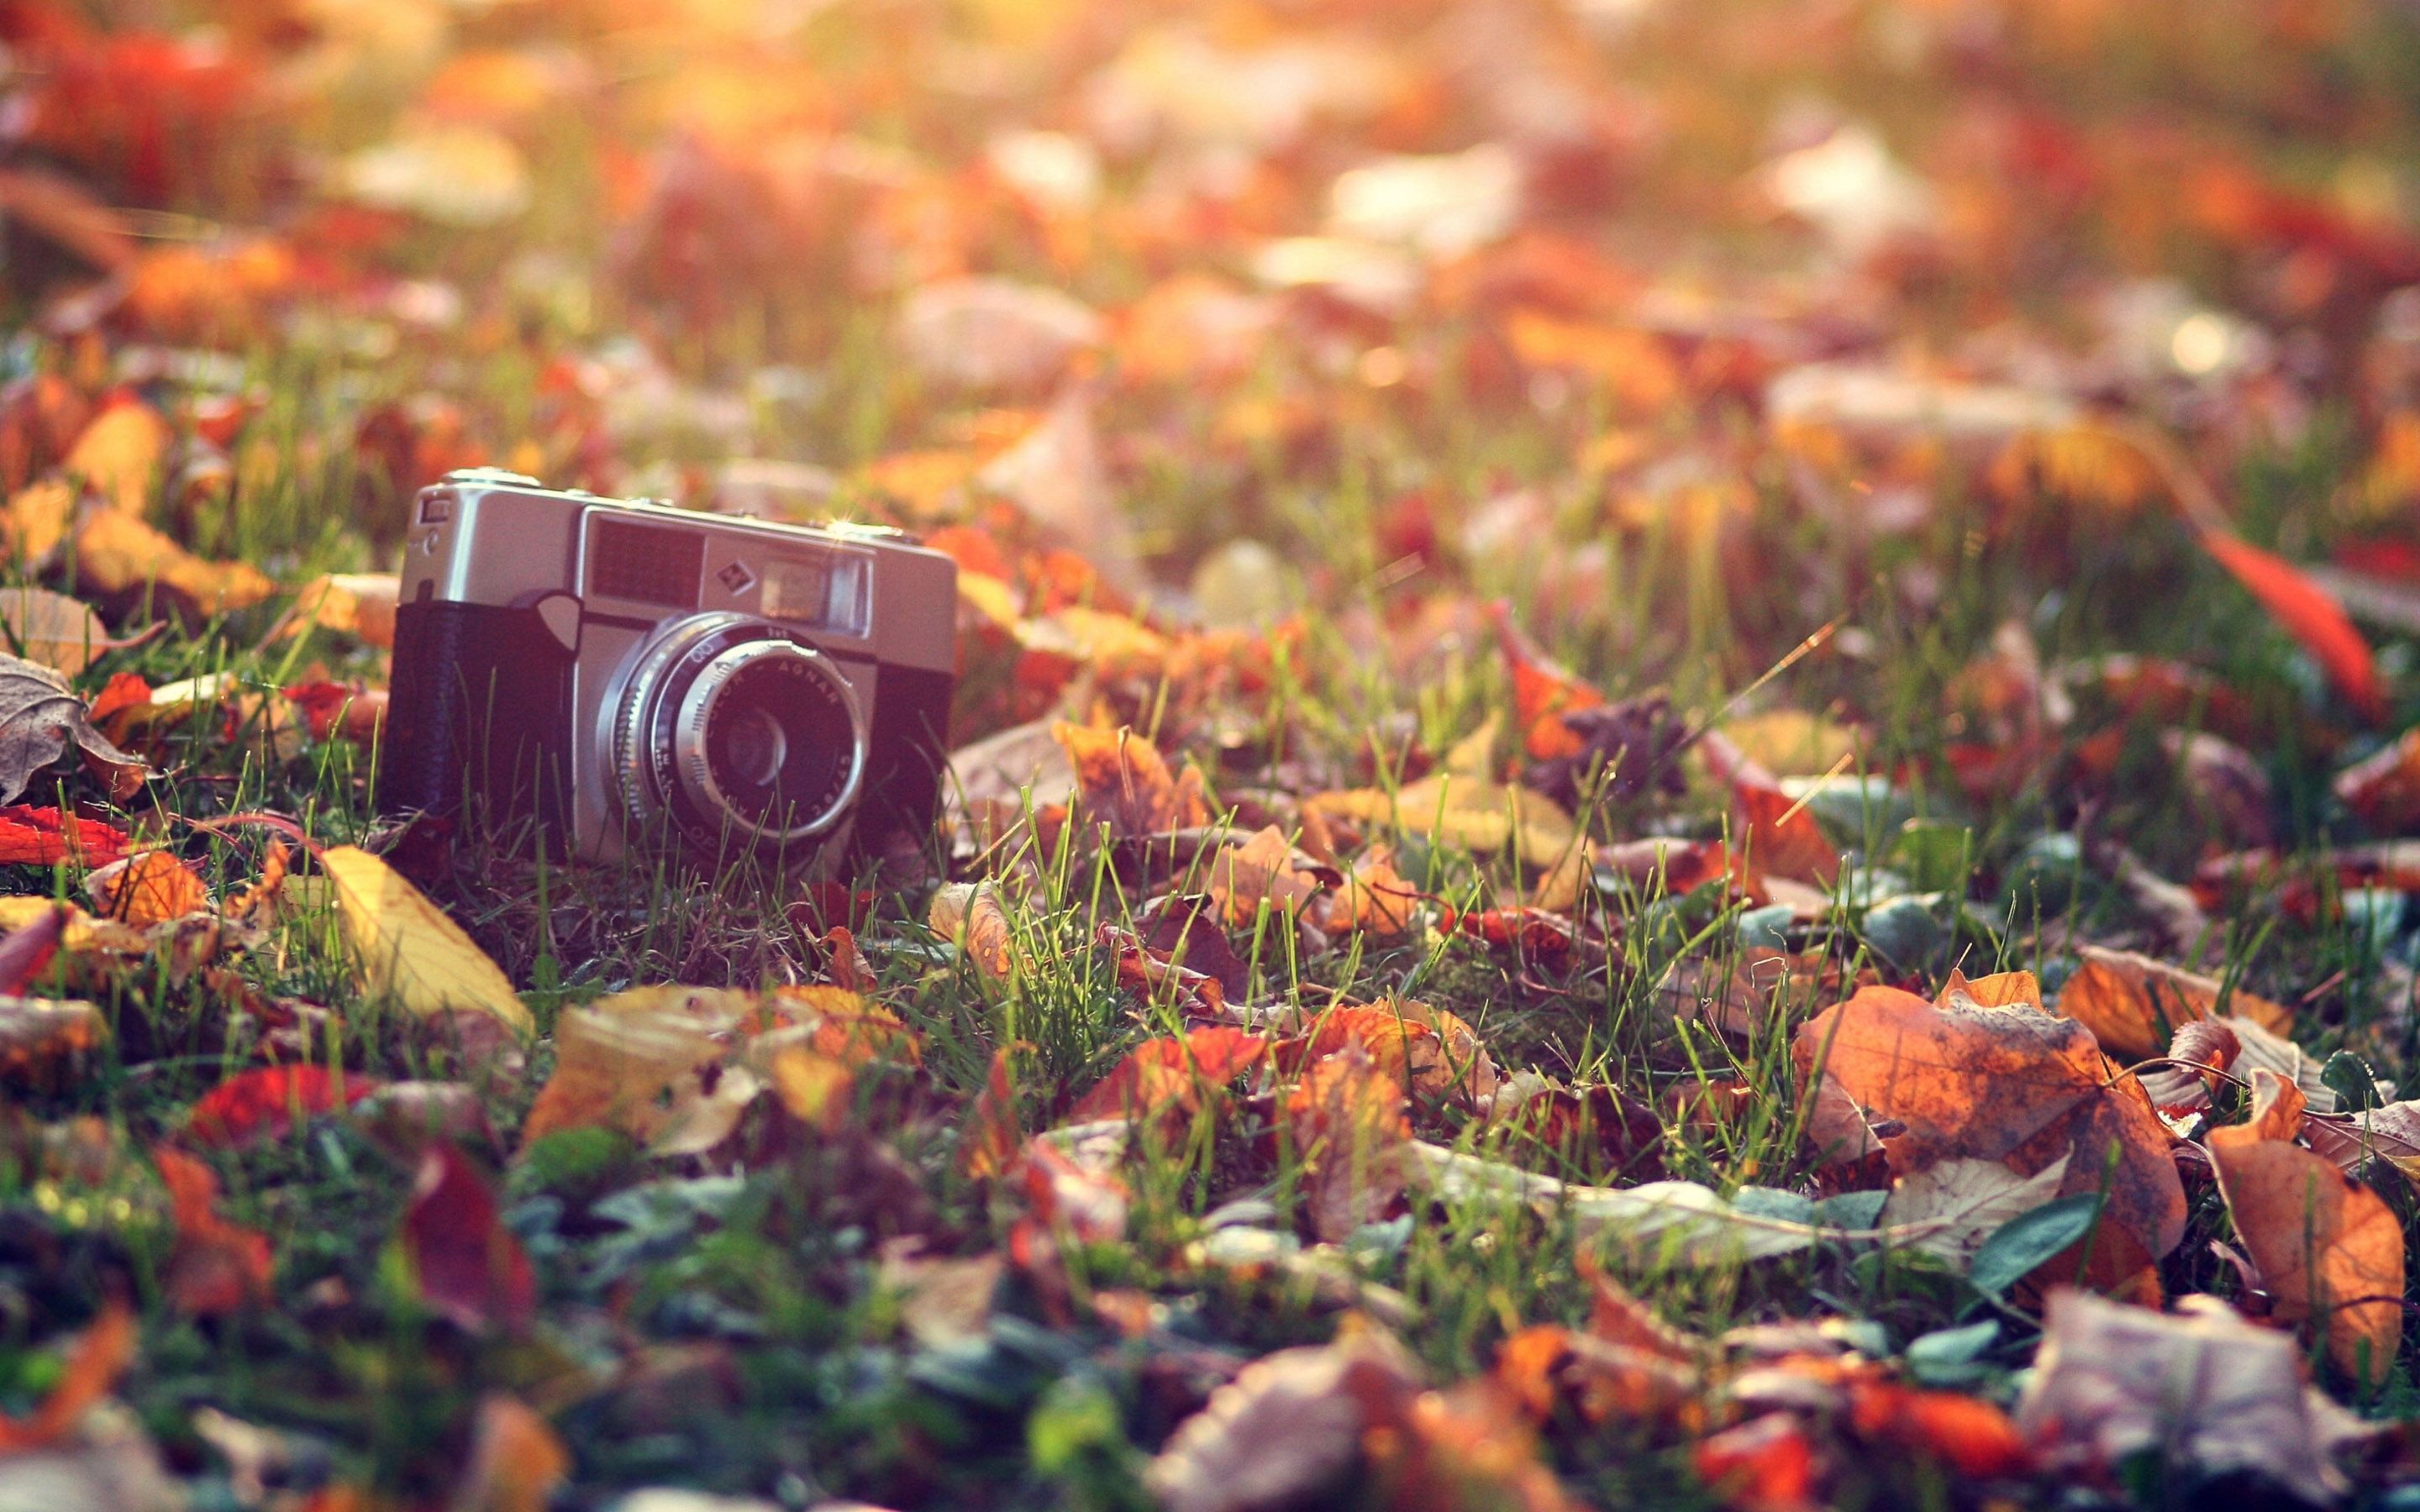 An old camera on the grass with autumn leaves - Vintage fall